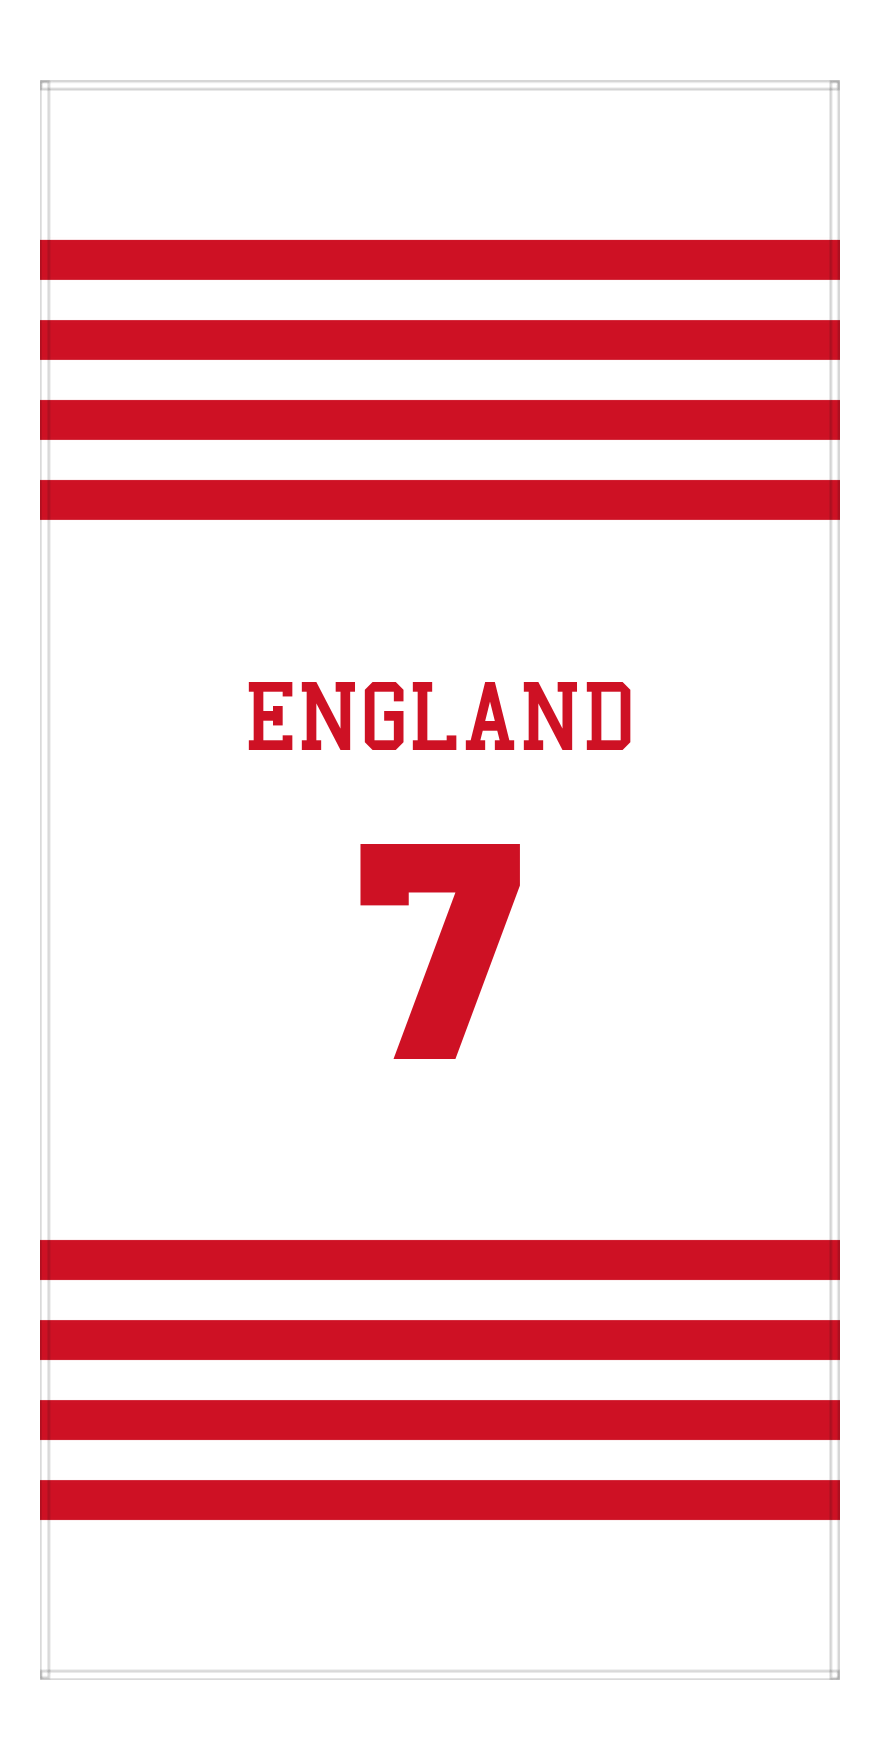 Personalized Jersey Number 3-on-1 Stripes Sports Beach Towel - England - Vertical Design - Front View